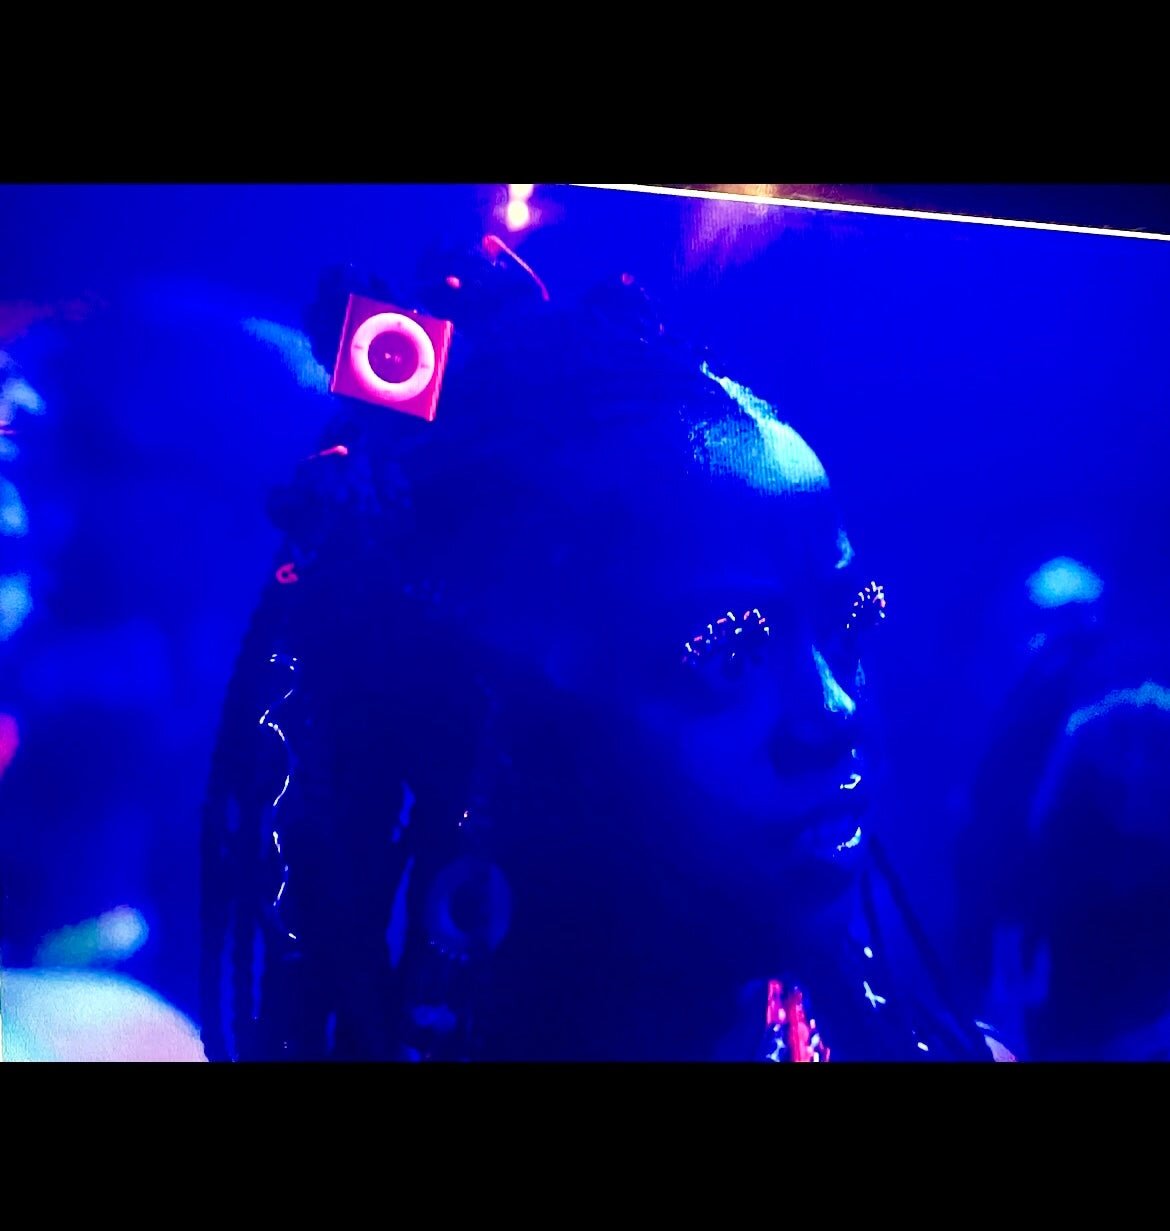 Grace Duah on HBOMax's Gossip Girl Season 2 wearing the Eye Candy Lashes by BFlare Beauty at a rave.